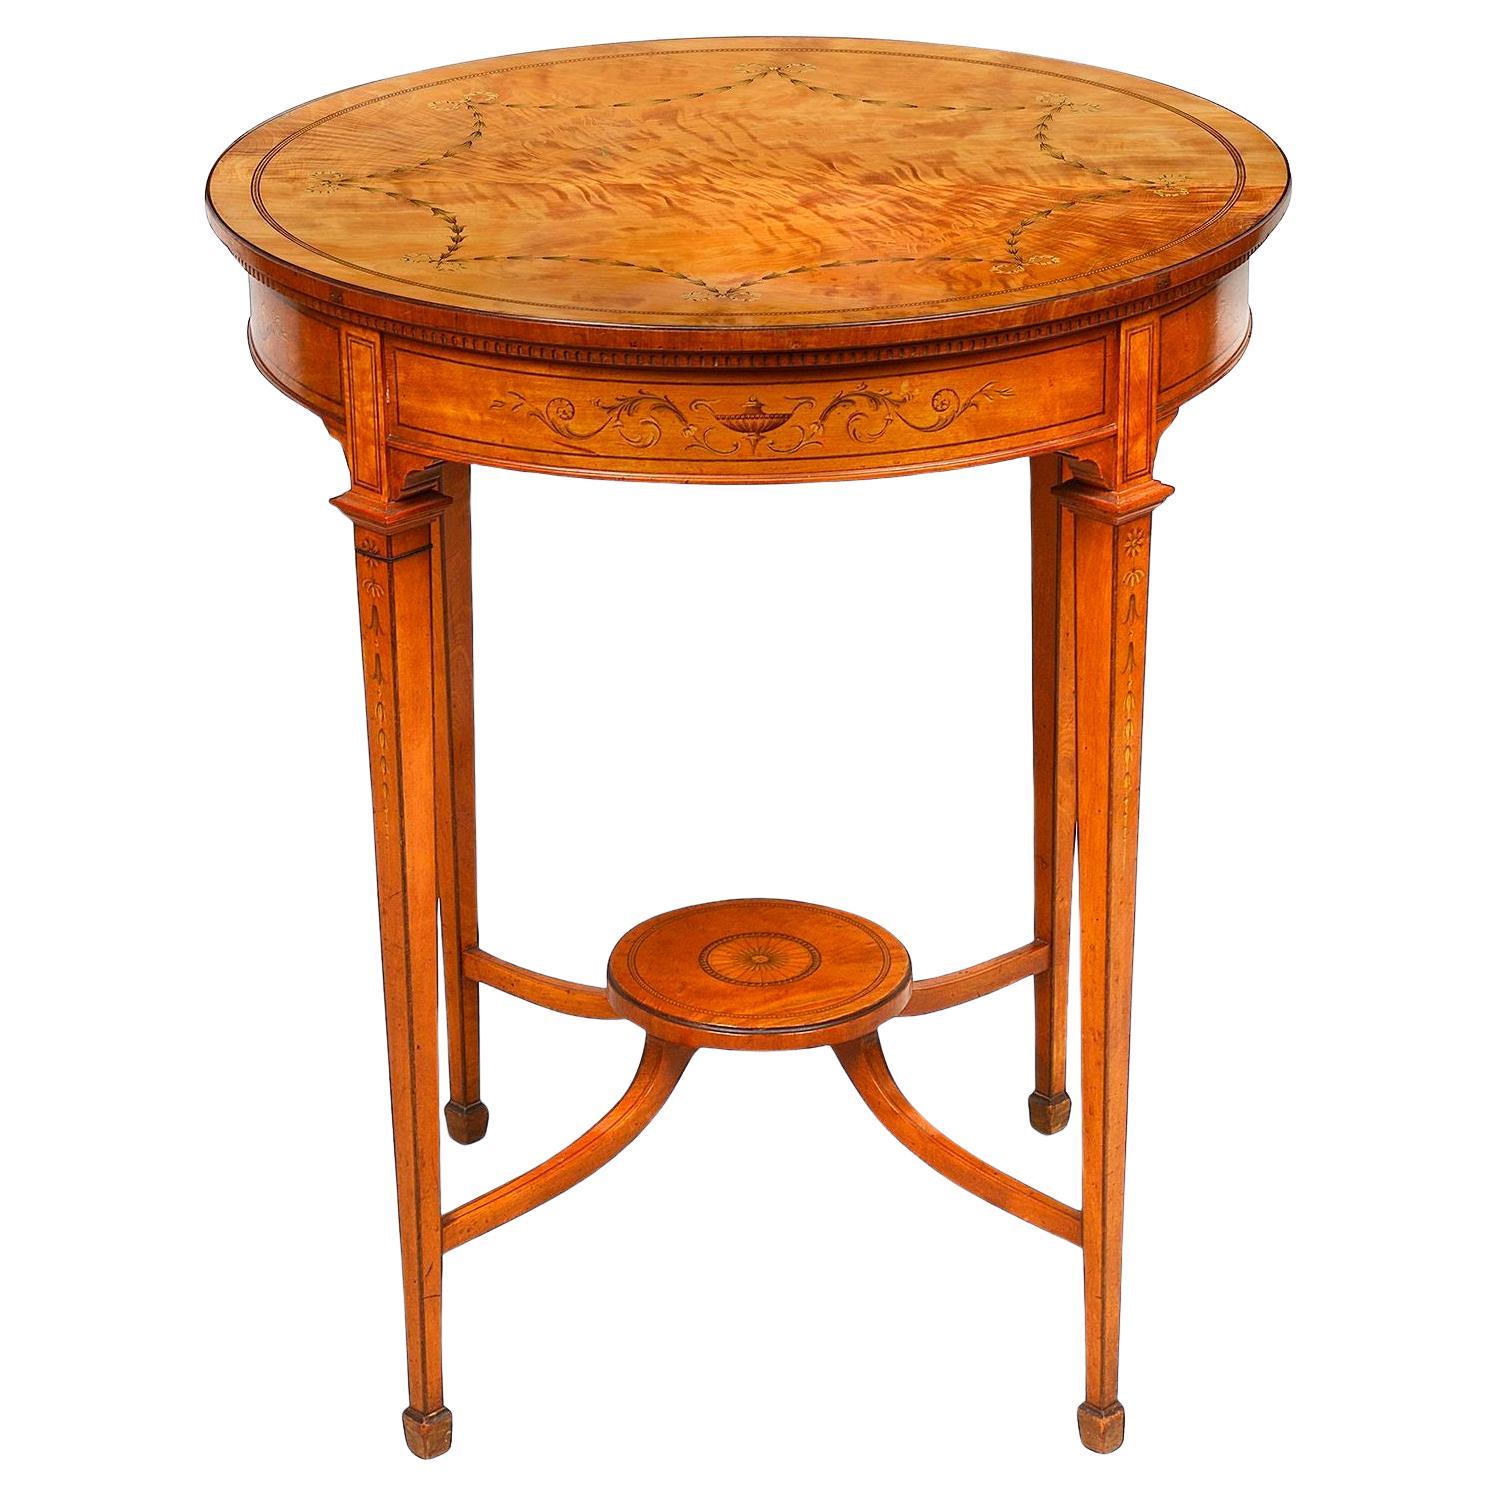 Sheraton Revival Satinwood Inlaid Side Table, 19th Century